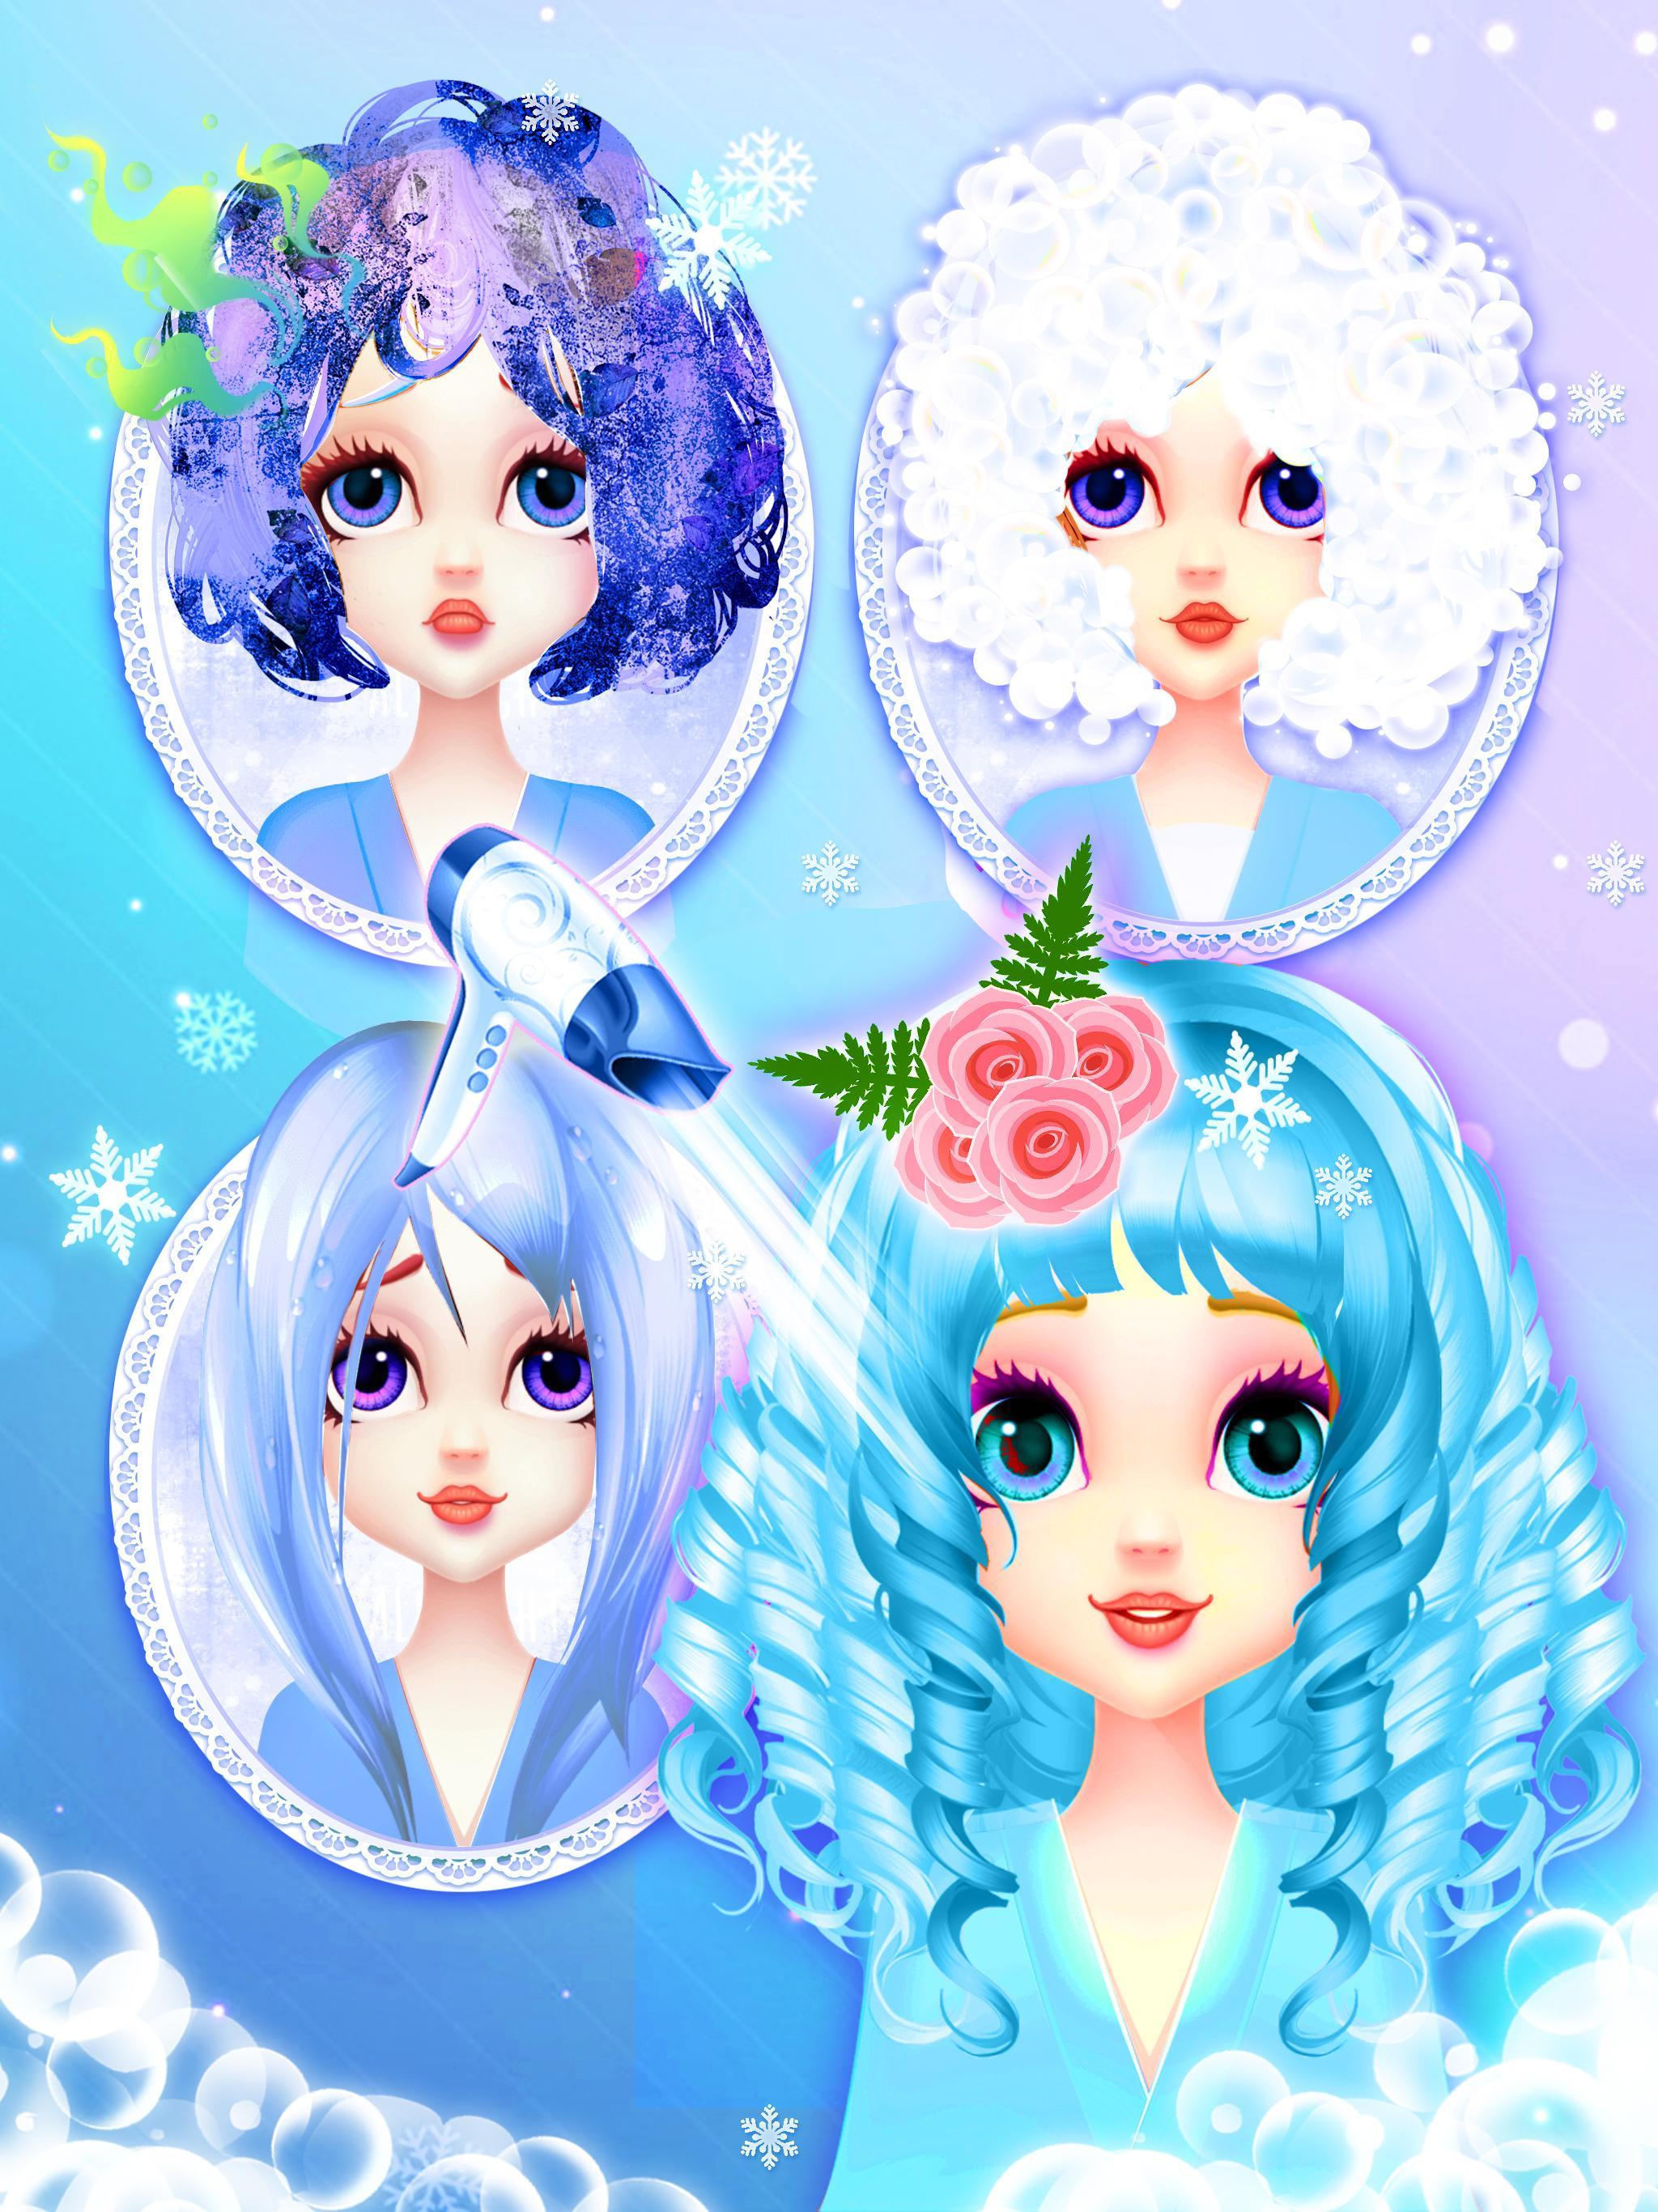 Ice Princess Hair Salon for Android - APK Download